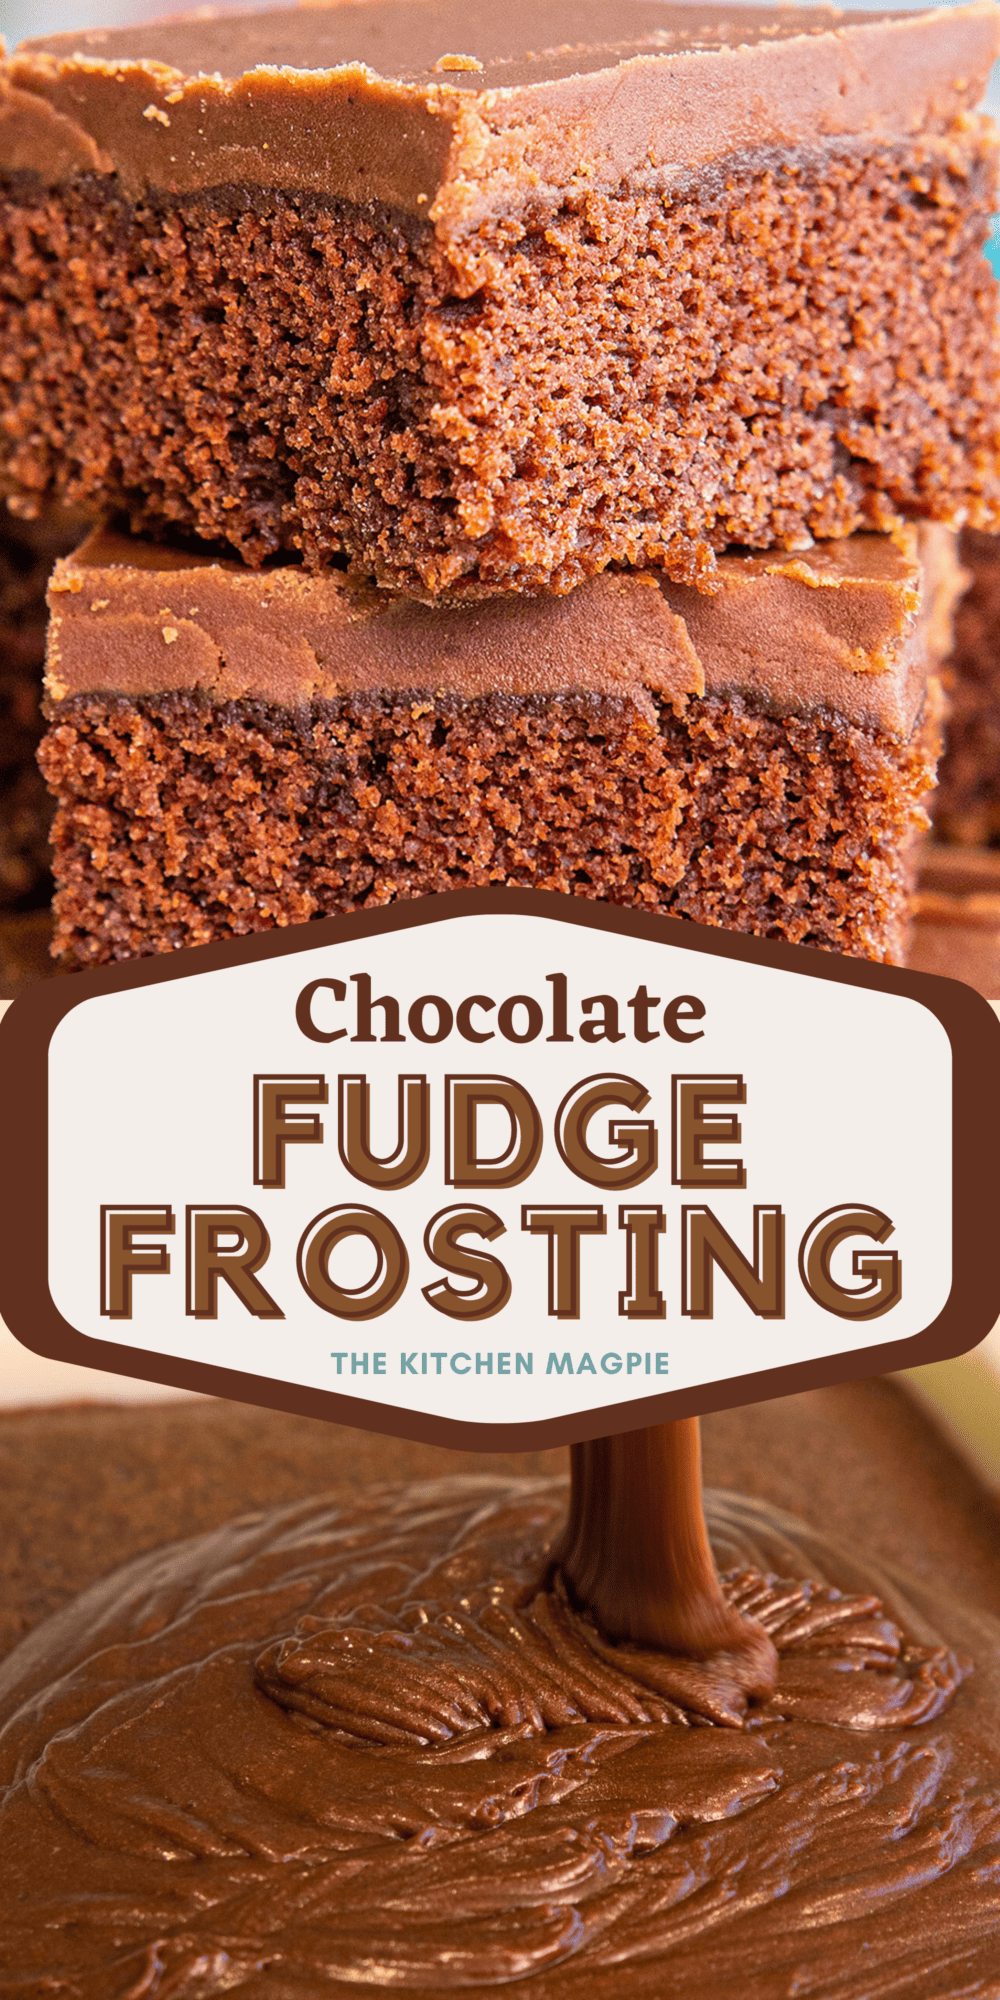 Fudge frosting that hardens into a crackled fudge topping on your cakes that melts in your mouth. This is traditionally used on sheet cakes.